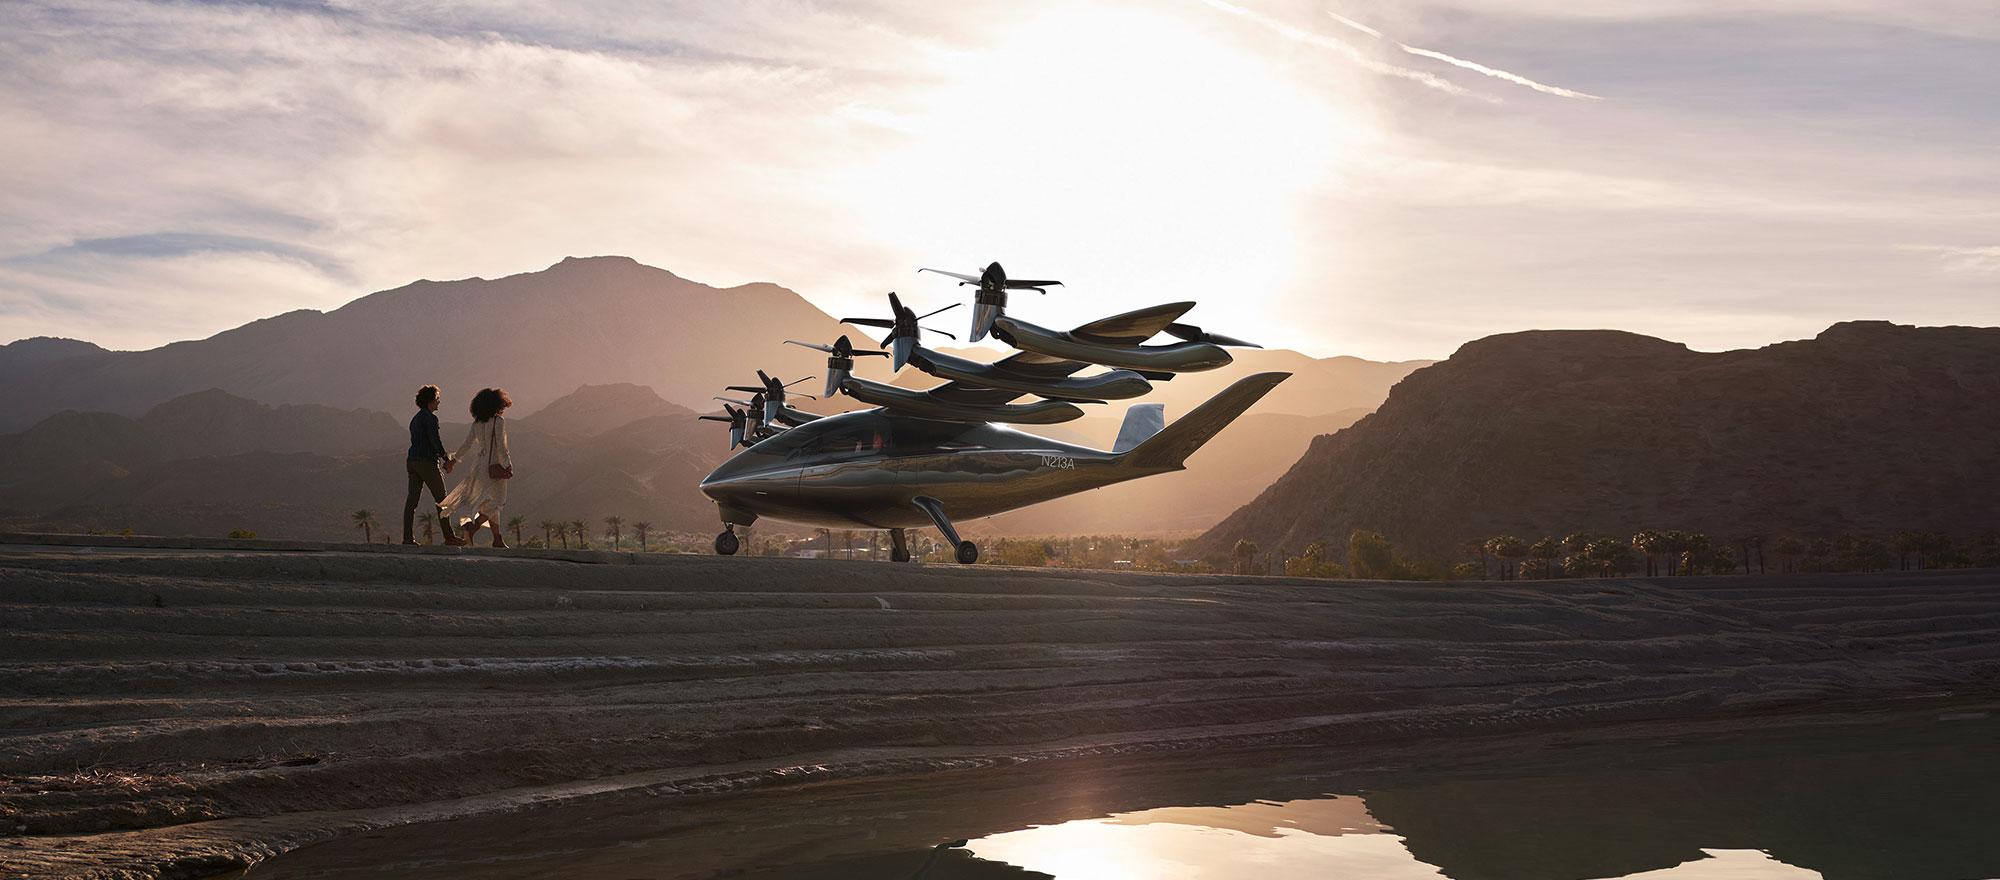 Archer is one of several start-ups working to bring an all-electric eVTOL aircraft to market, and its plans were recently boosted by a $1.1 billion share flotation.